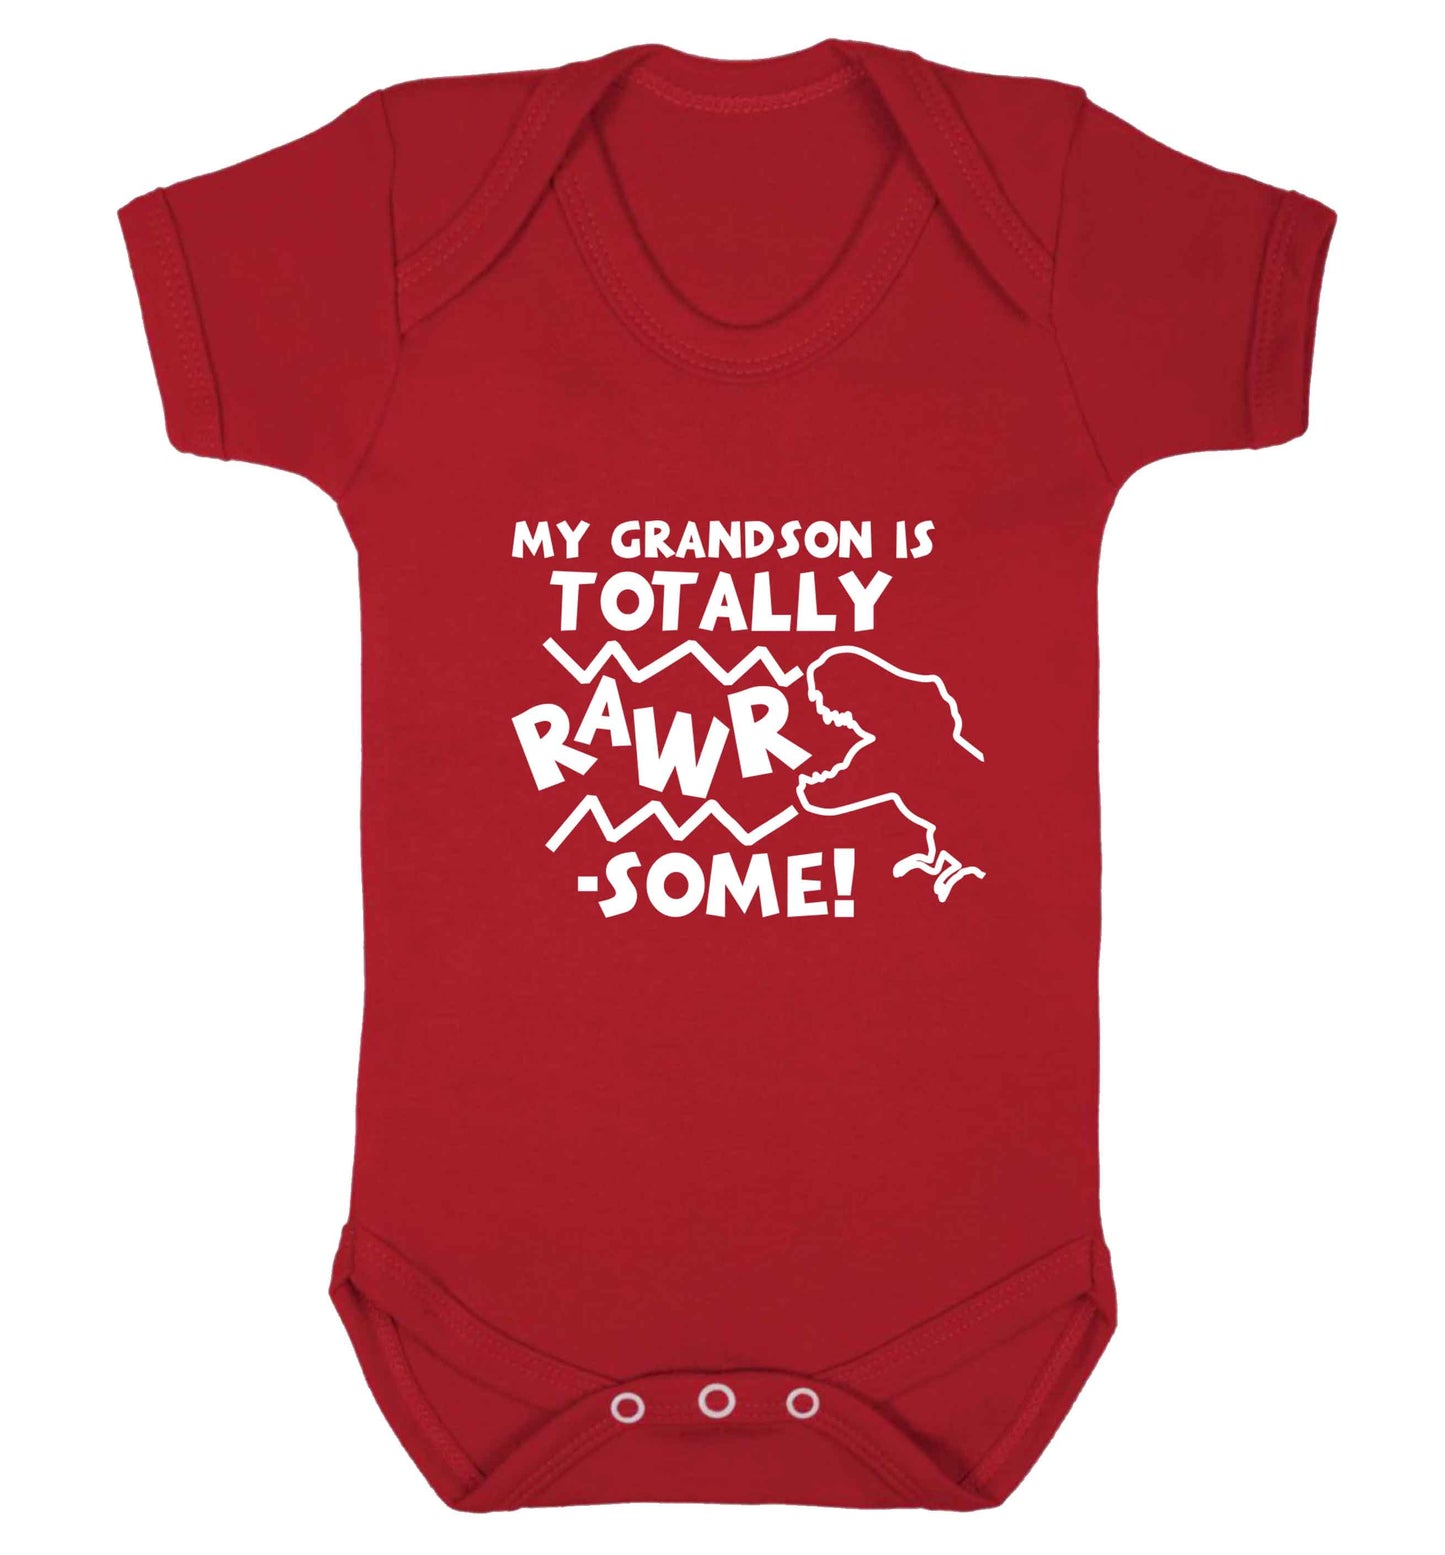 My grandson is totally rawrsome baby vest red 18-24 months